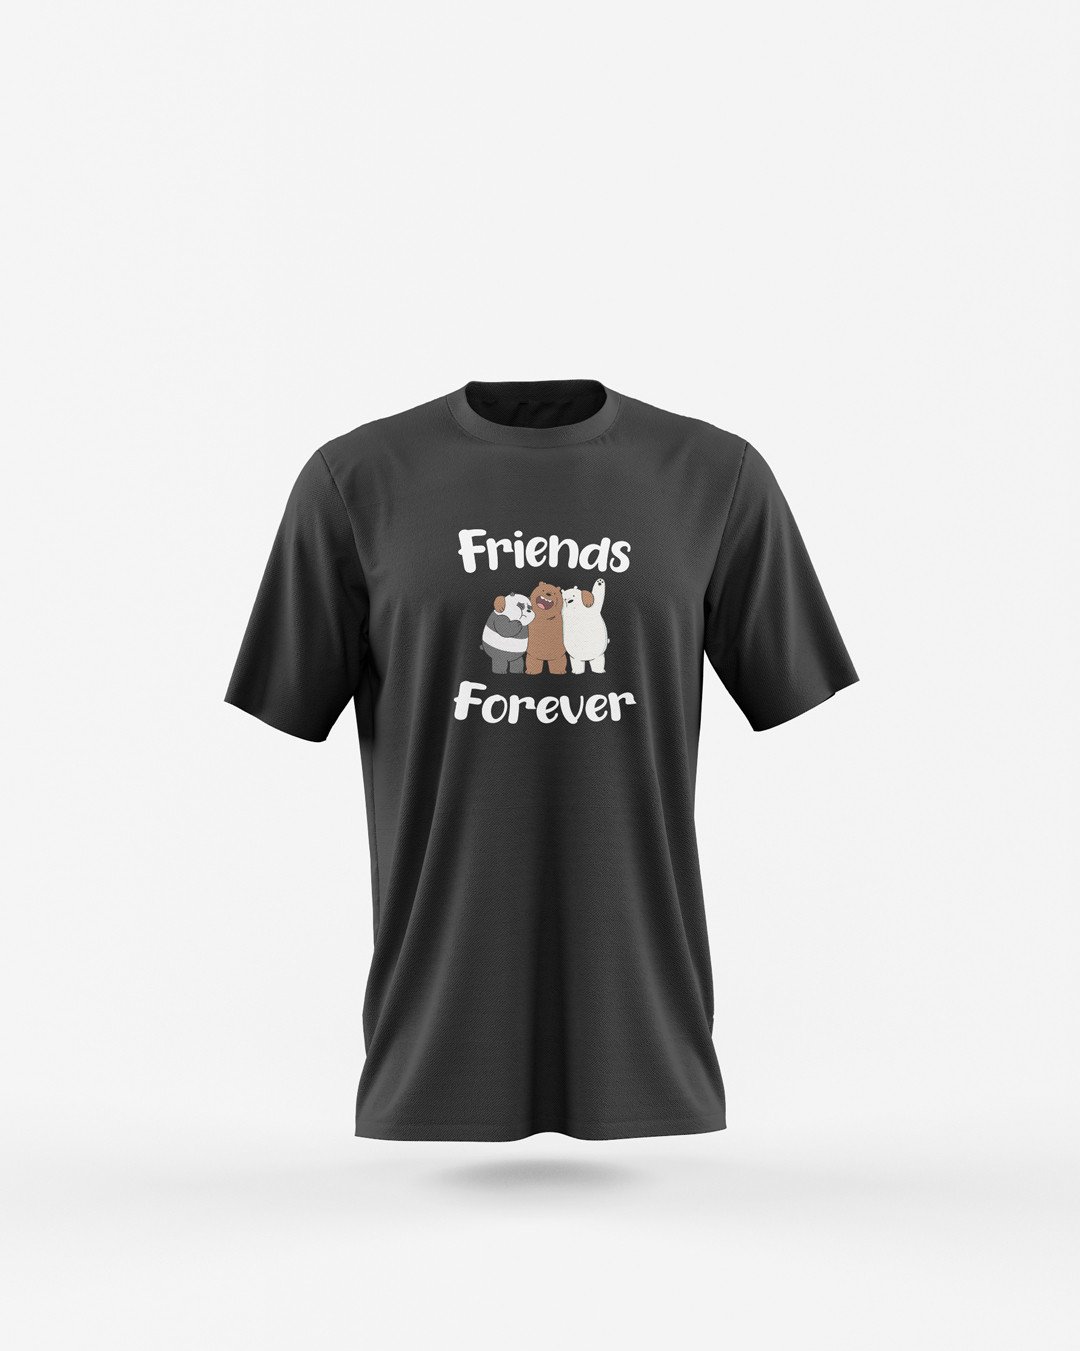 Friends Forever Printed T-Shirt